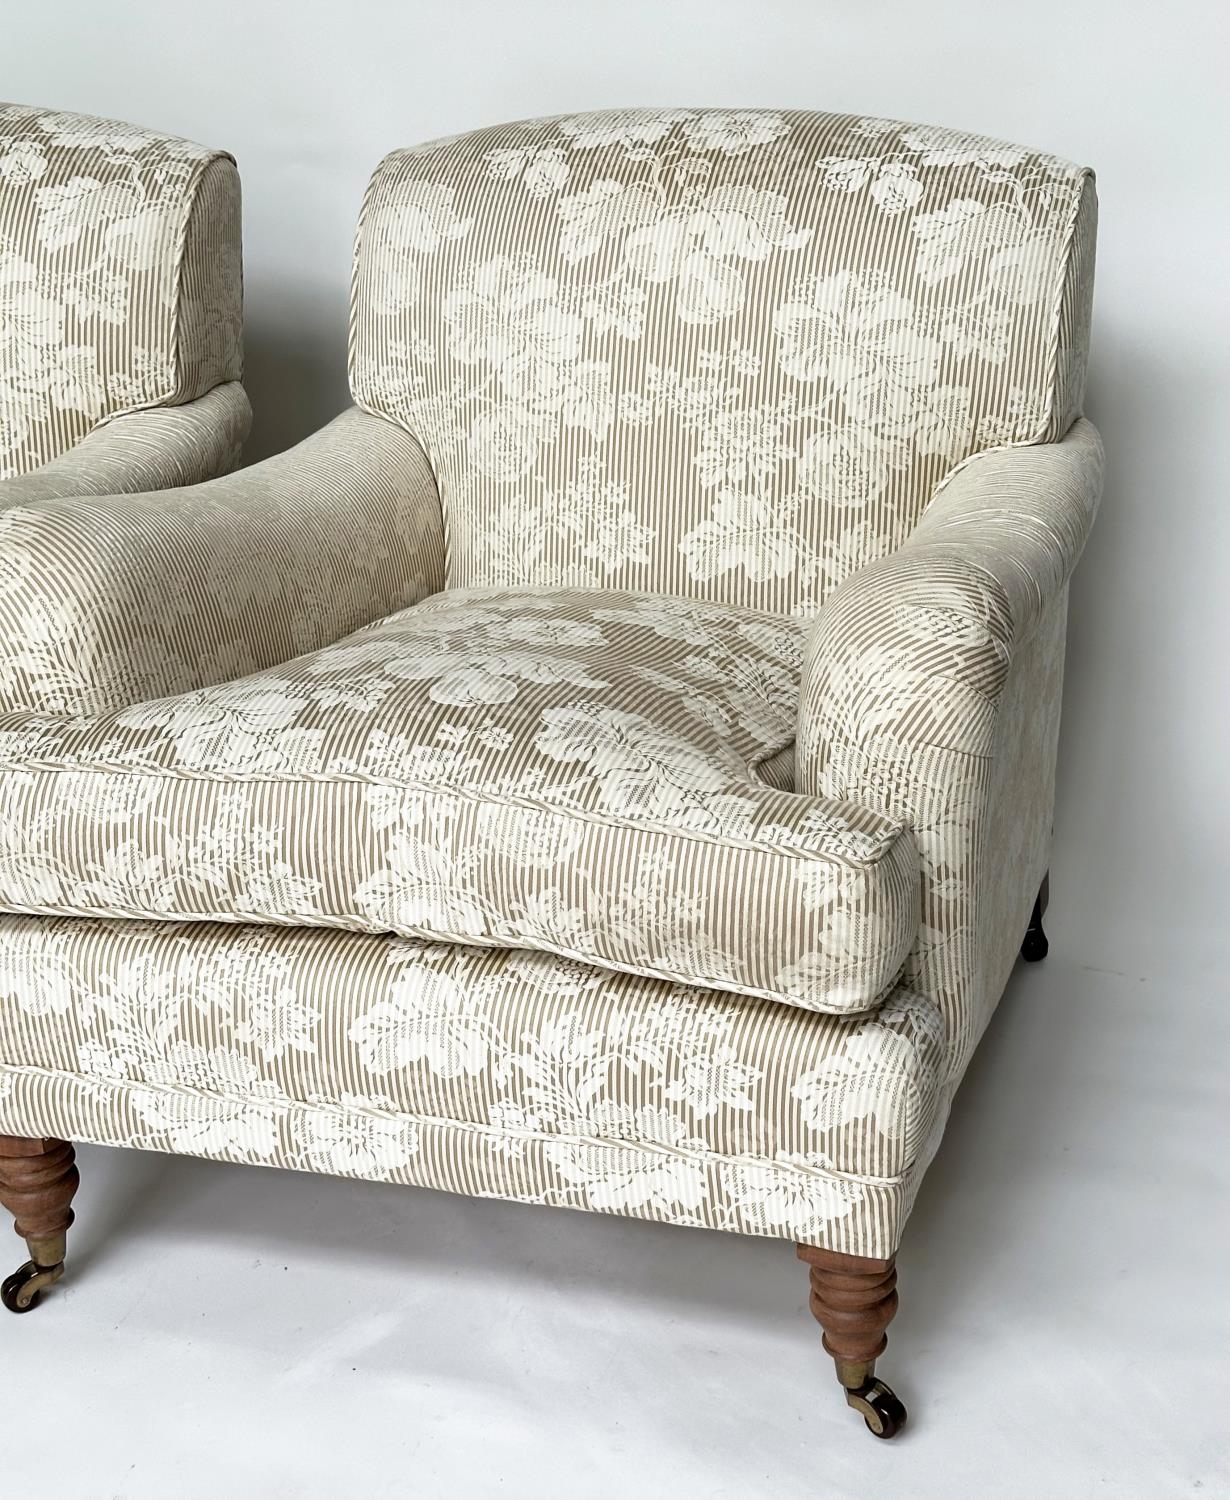 ARMCHAIRS, a pair, Howard style with floral and grey striped upholstery, 88cm W. (2) - Image 3 of 8